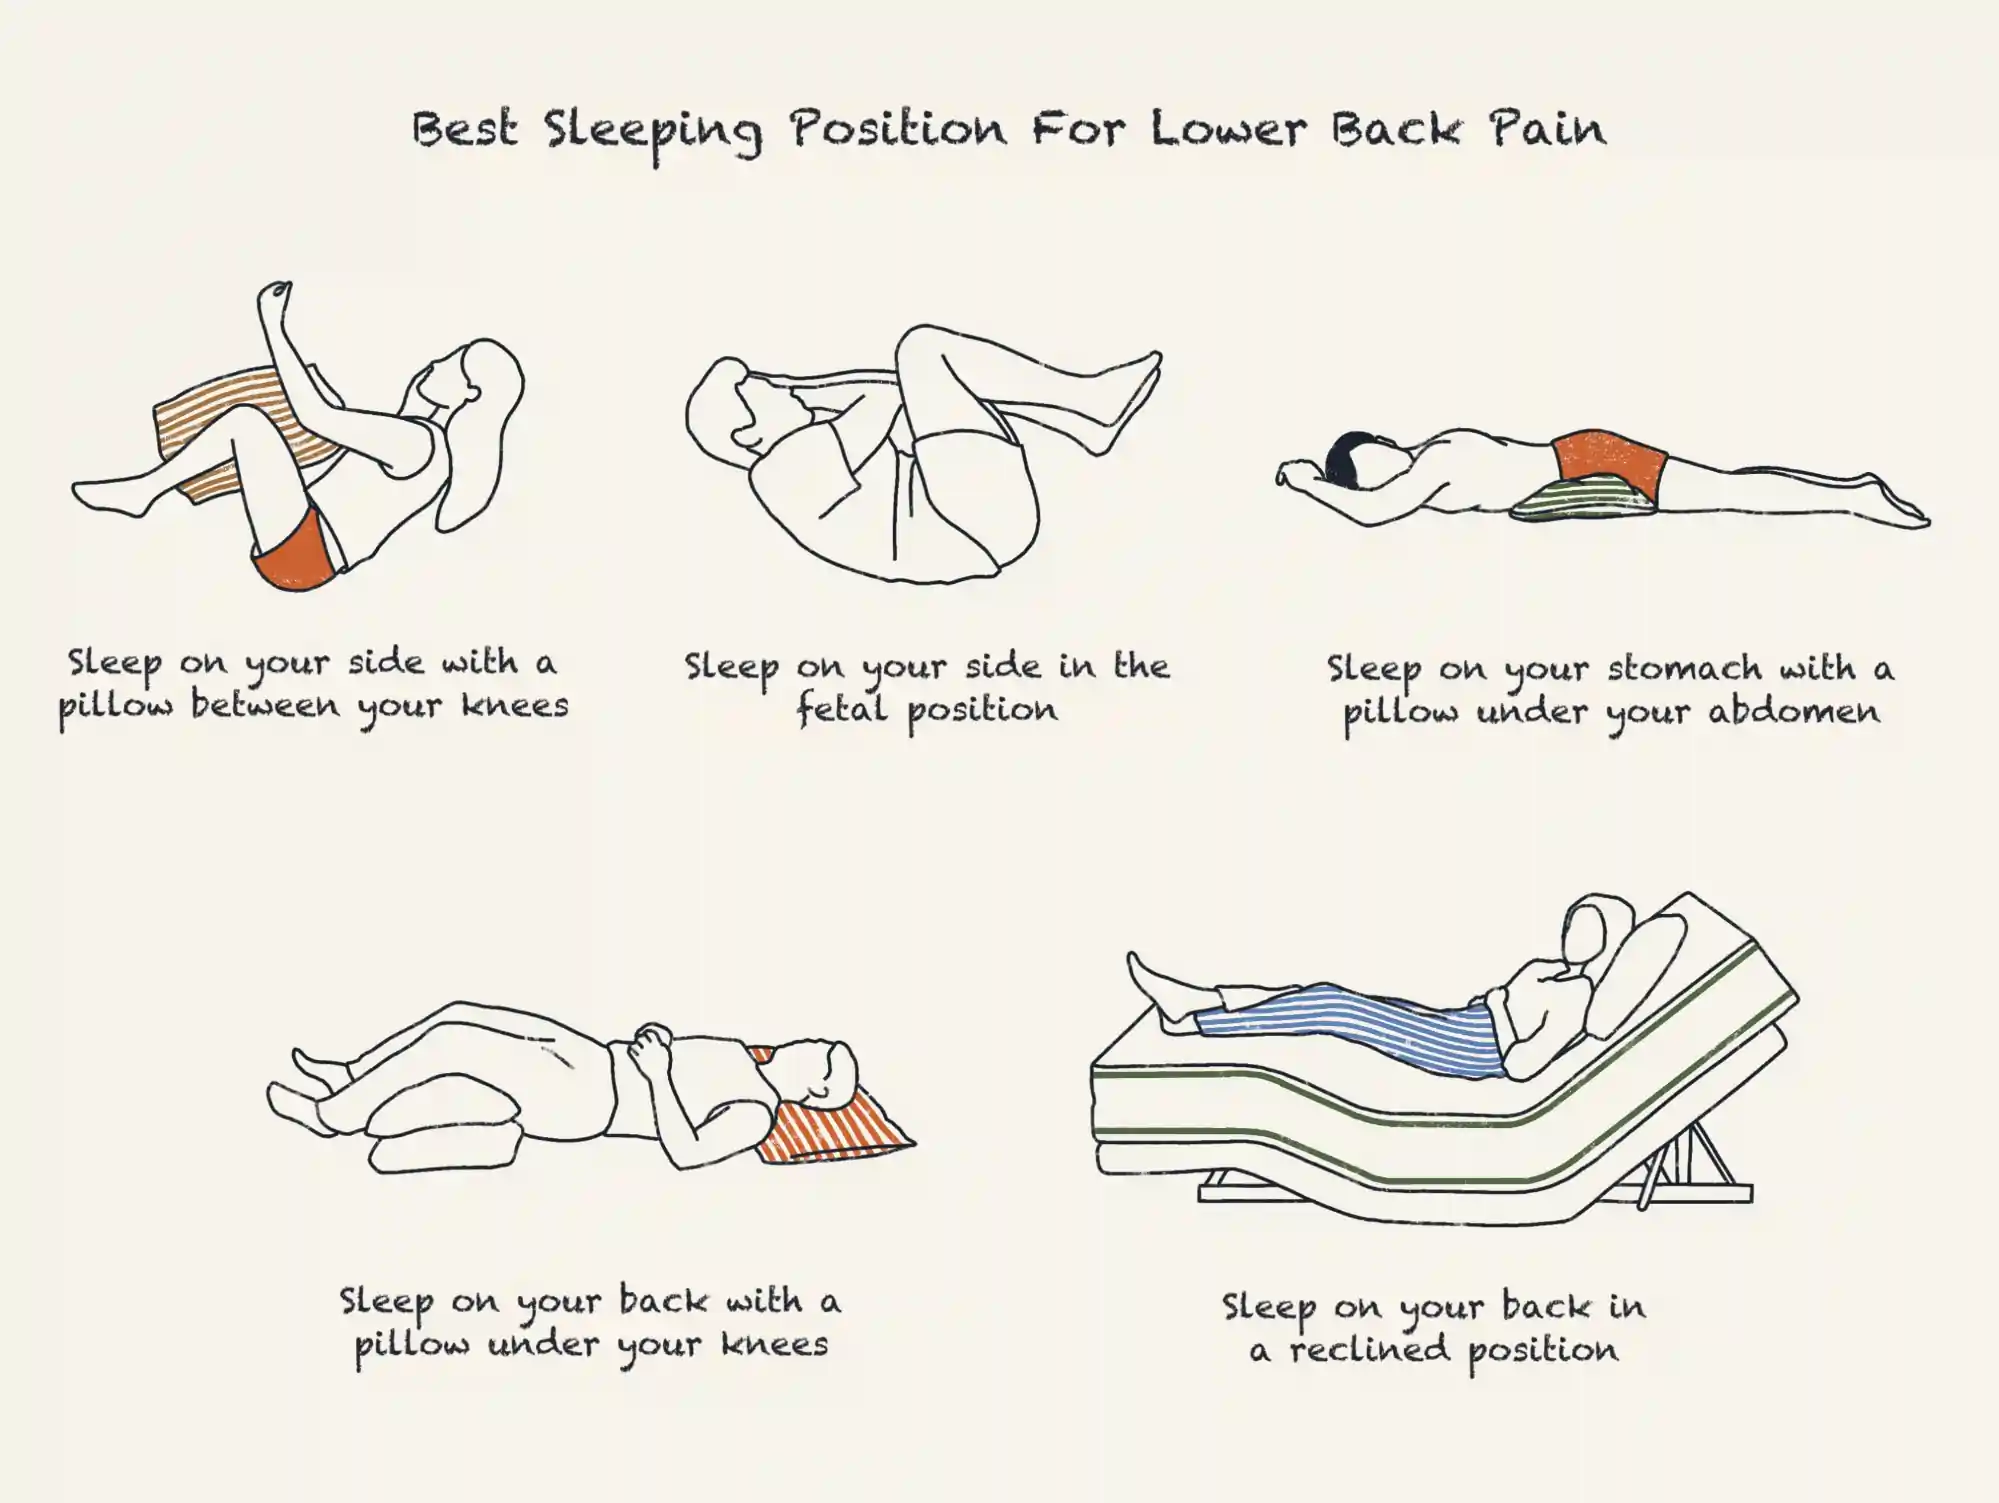 Best Pillow for Back Pain